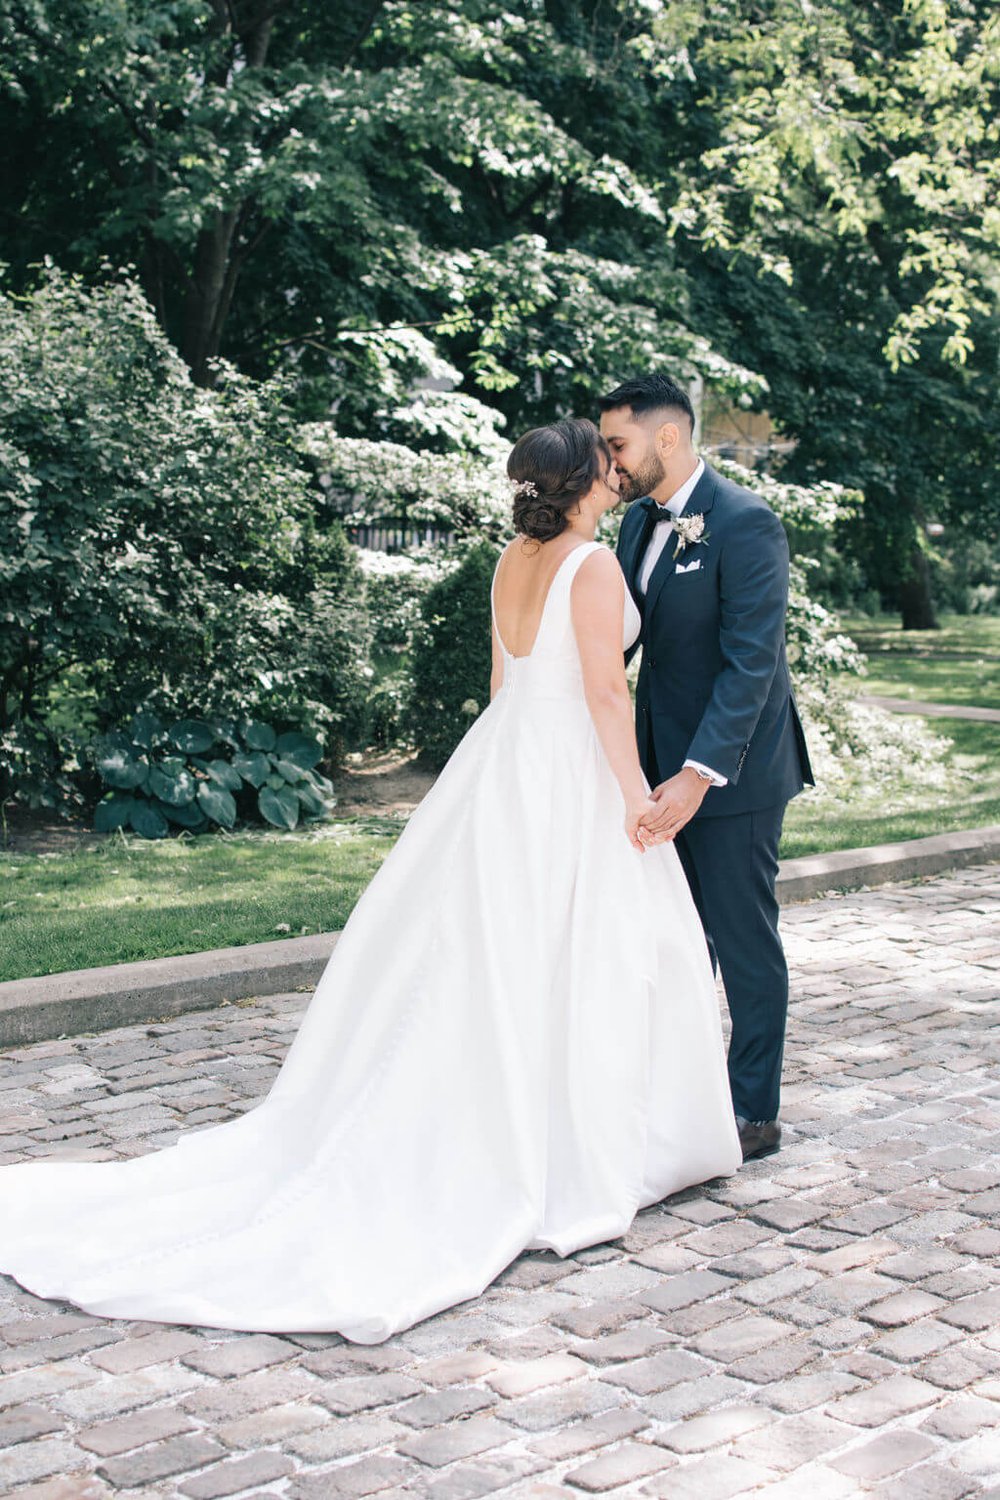 Timeless wedding day kiss photographed by Toronto wedding photographers, Ugo Photography